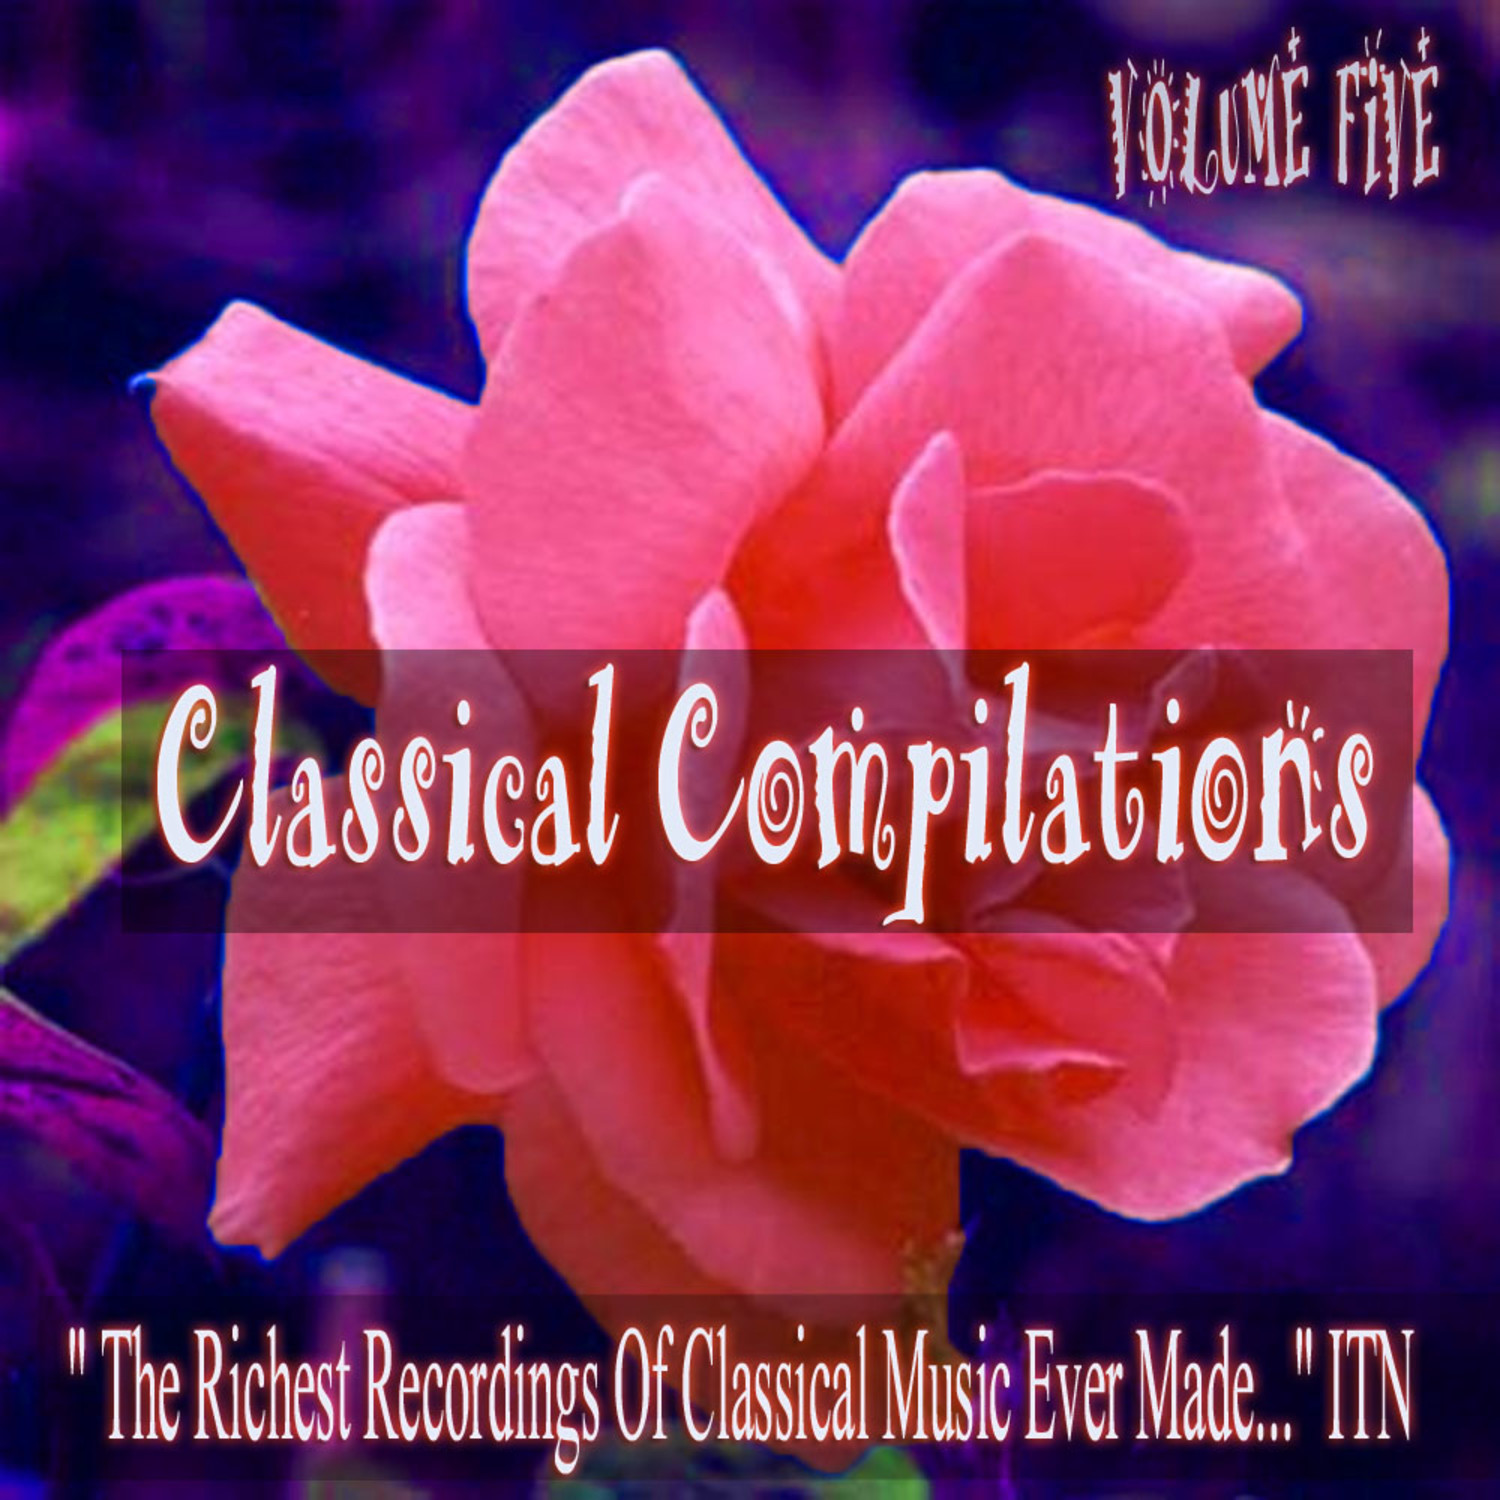 Classical Compilations Volume Five